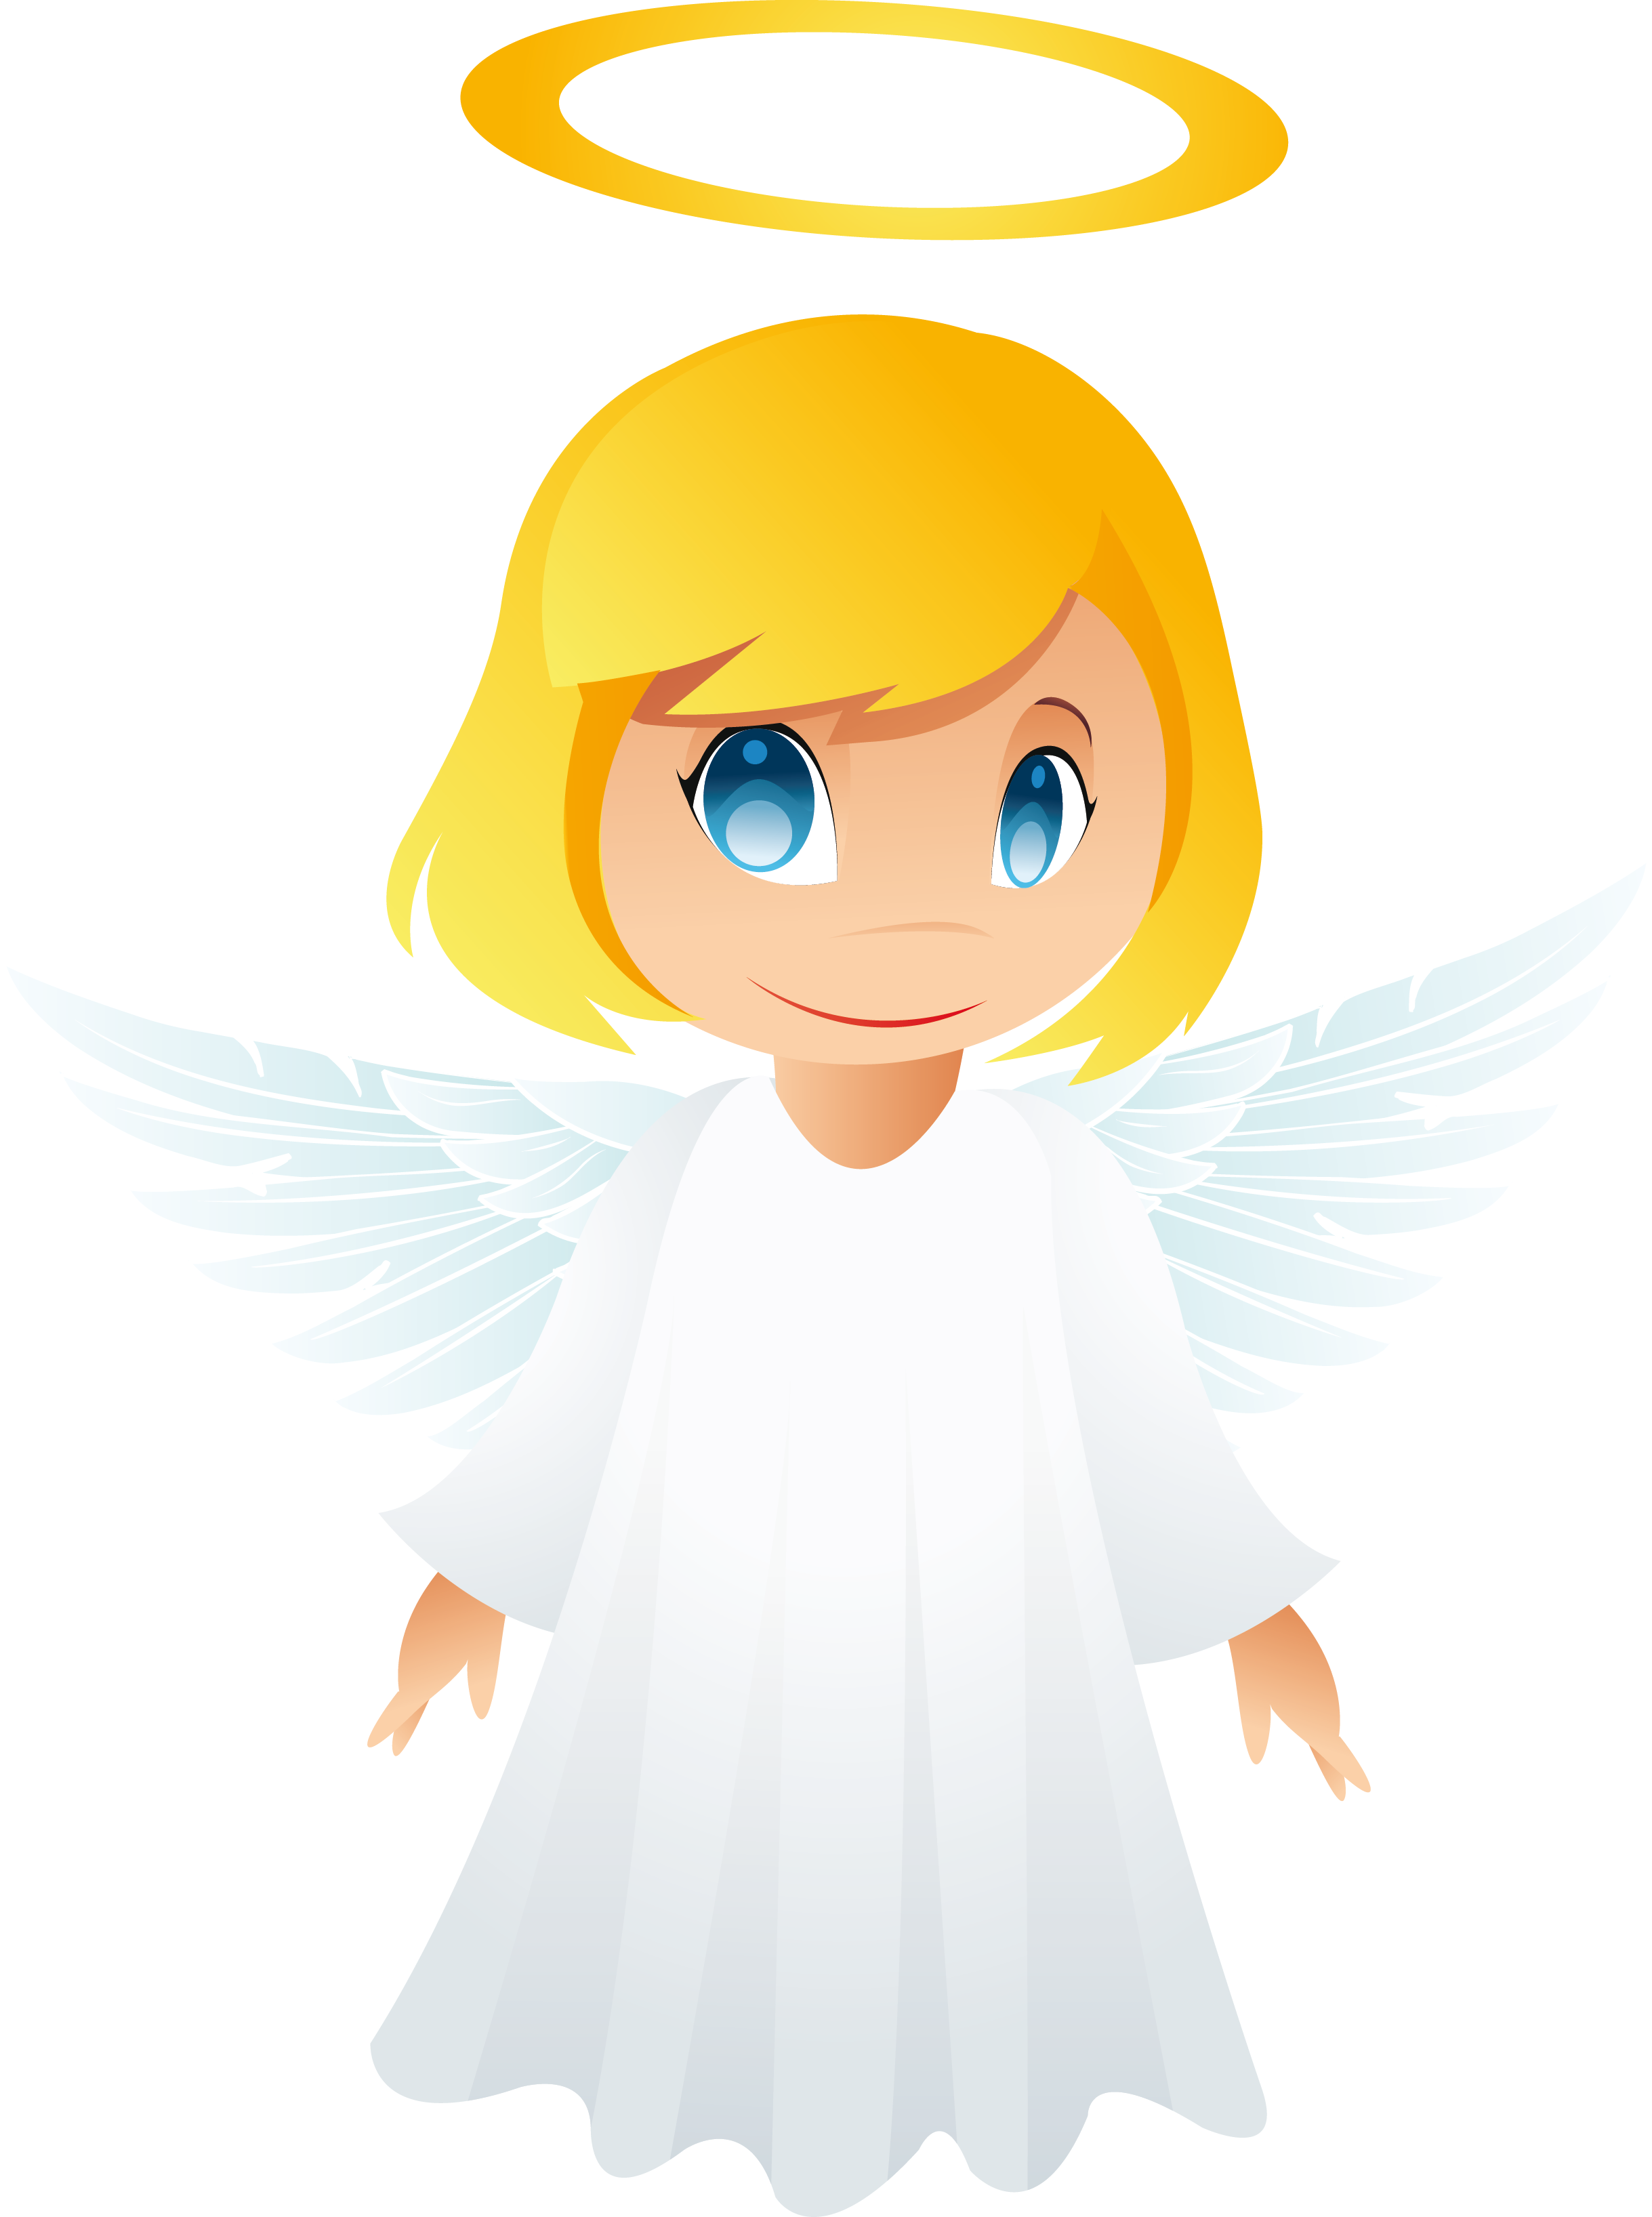 Free Christmas Angel Cliparts, Download Free Clip Art, Free.